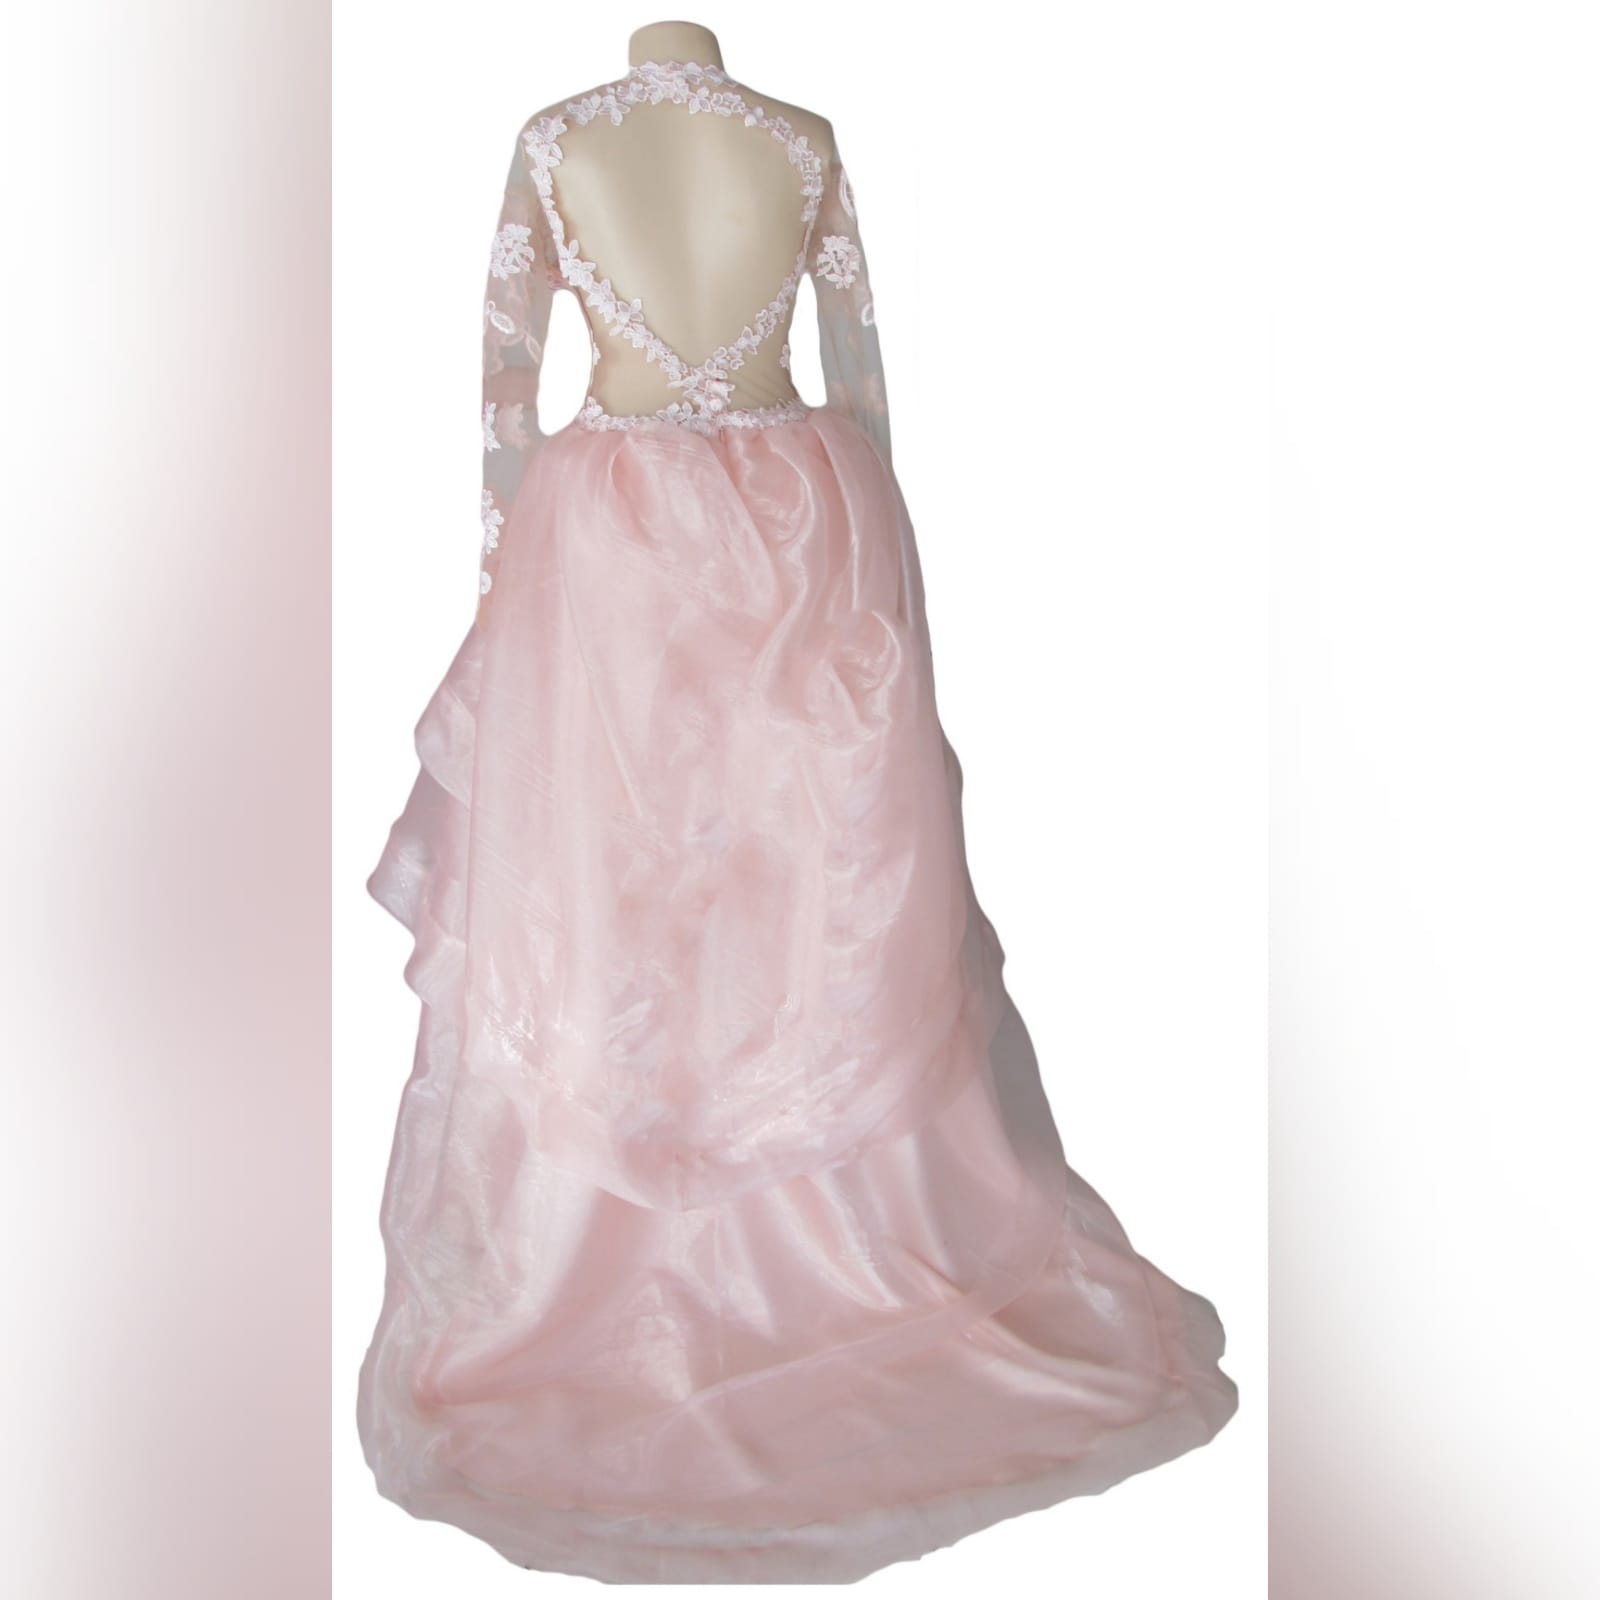 Baby pink long organza and lace prom ballgown 6 baby pink long organza and lace prom ballgown. This unique dress has a lace bodice with illusion neckline and sleeves and an open back. Bottom with a 3 layer organza design with a little train.